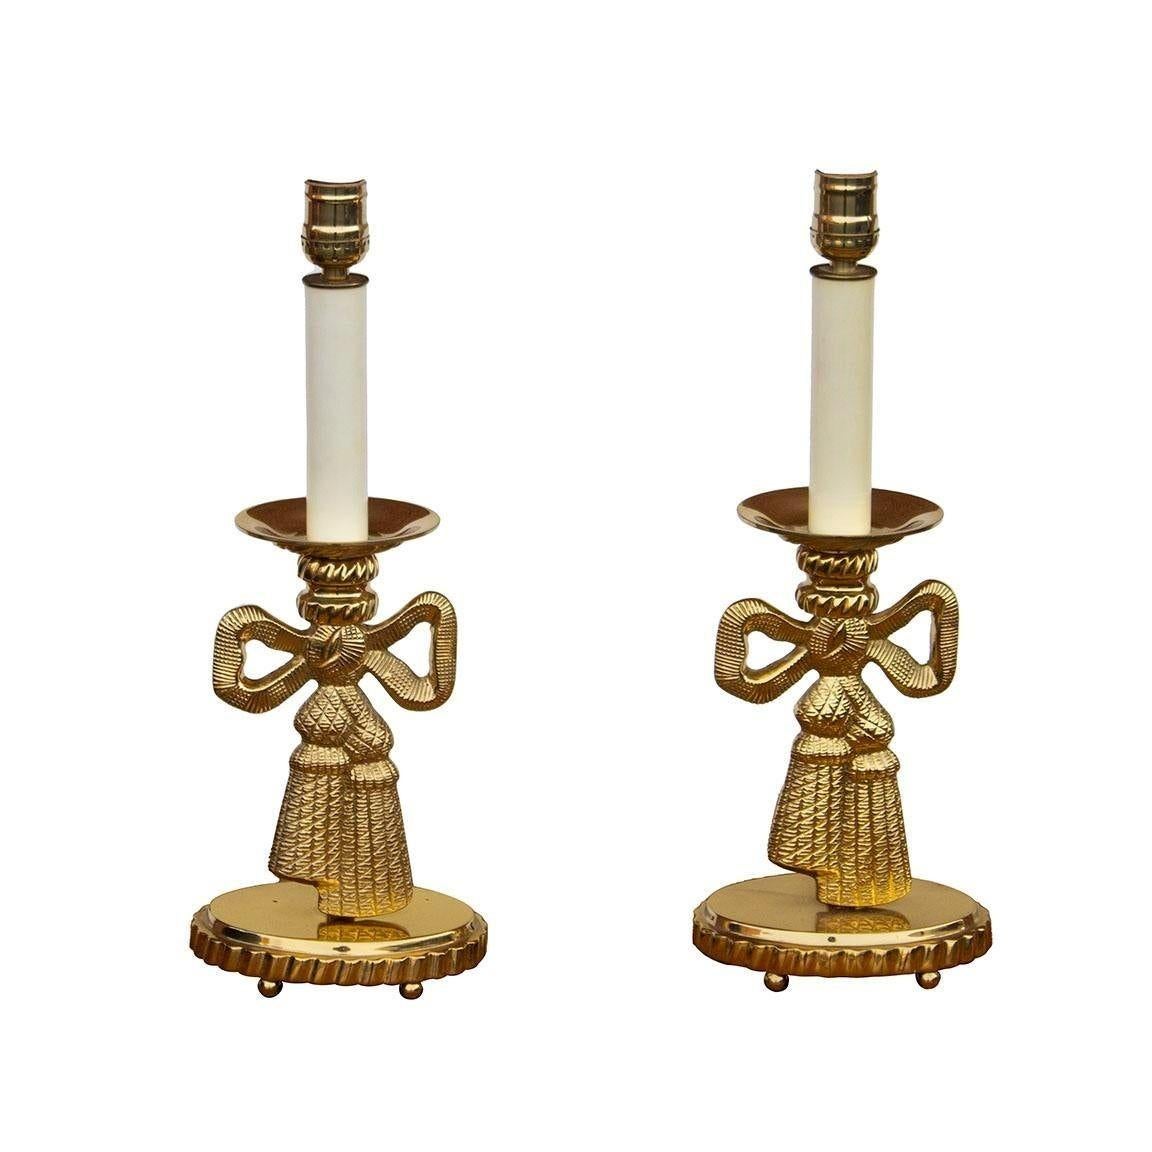 USA, 1980s
Pair of solid brass candlestick table lamps made by Top Brass. Each table lamp has brass ball feet and a weighted base, a polished brass upper with cream colored socket, original oval black paper shades that clip on to the bulb, and